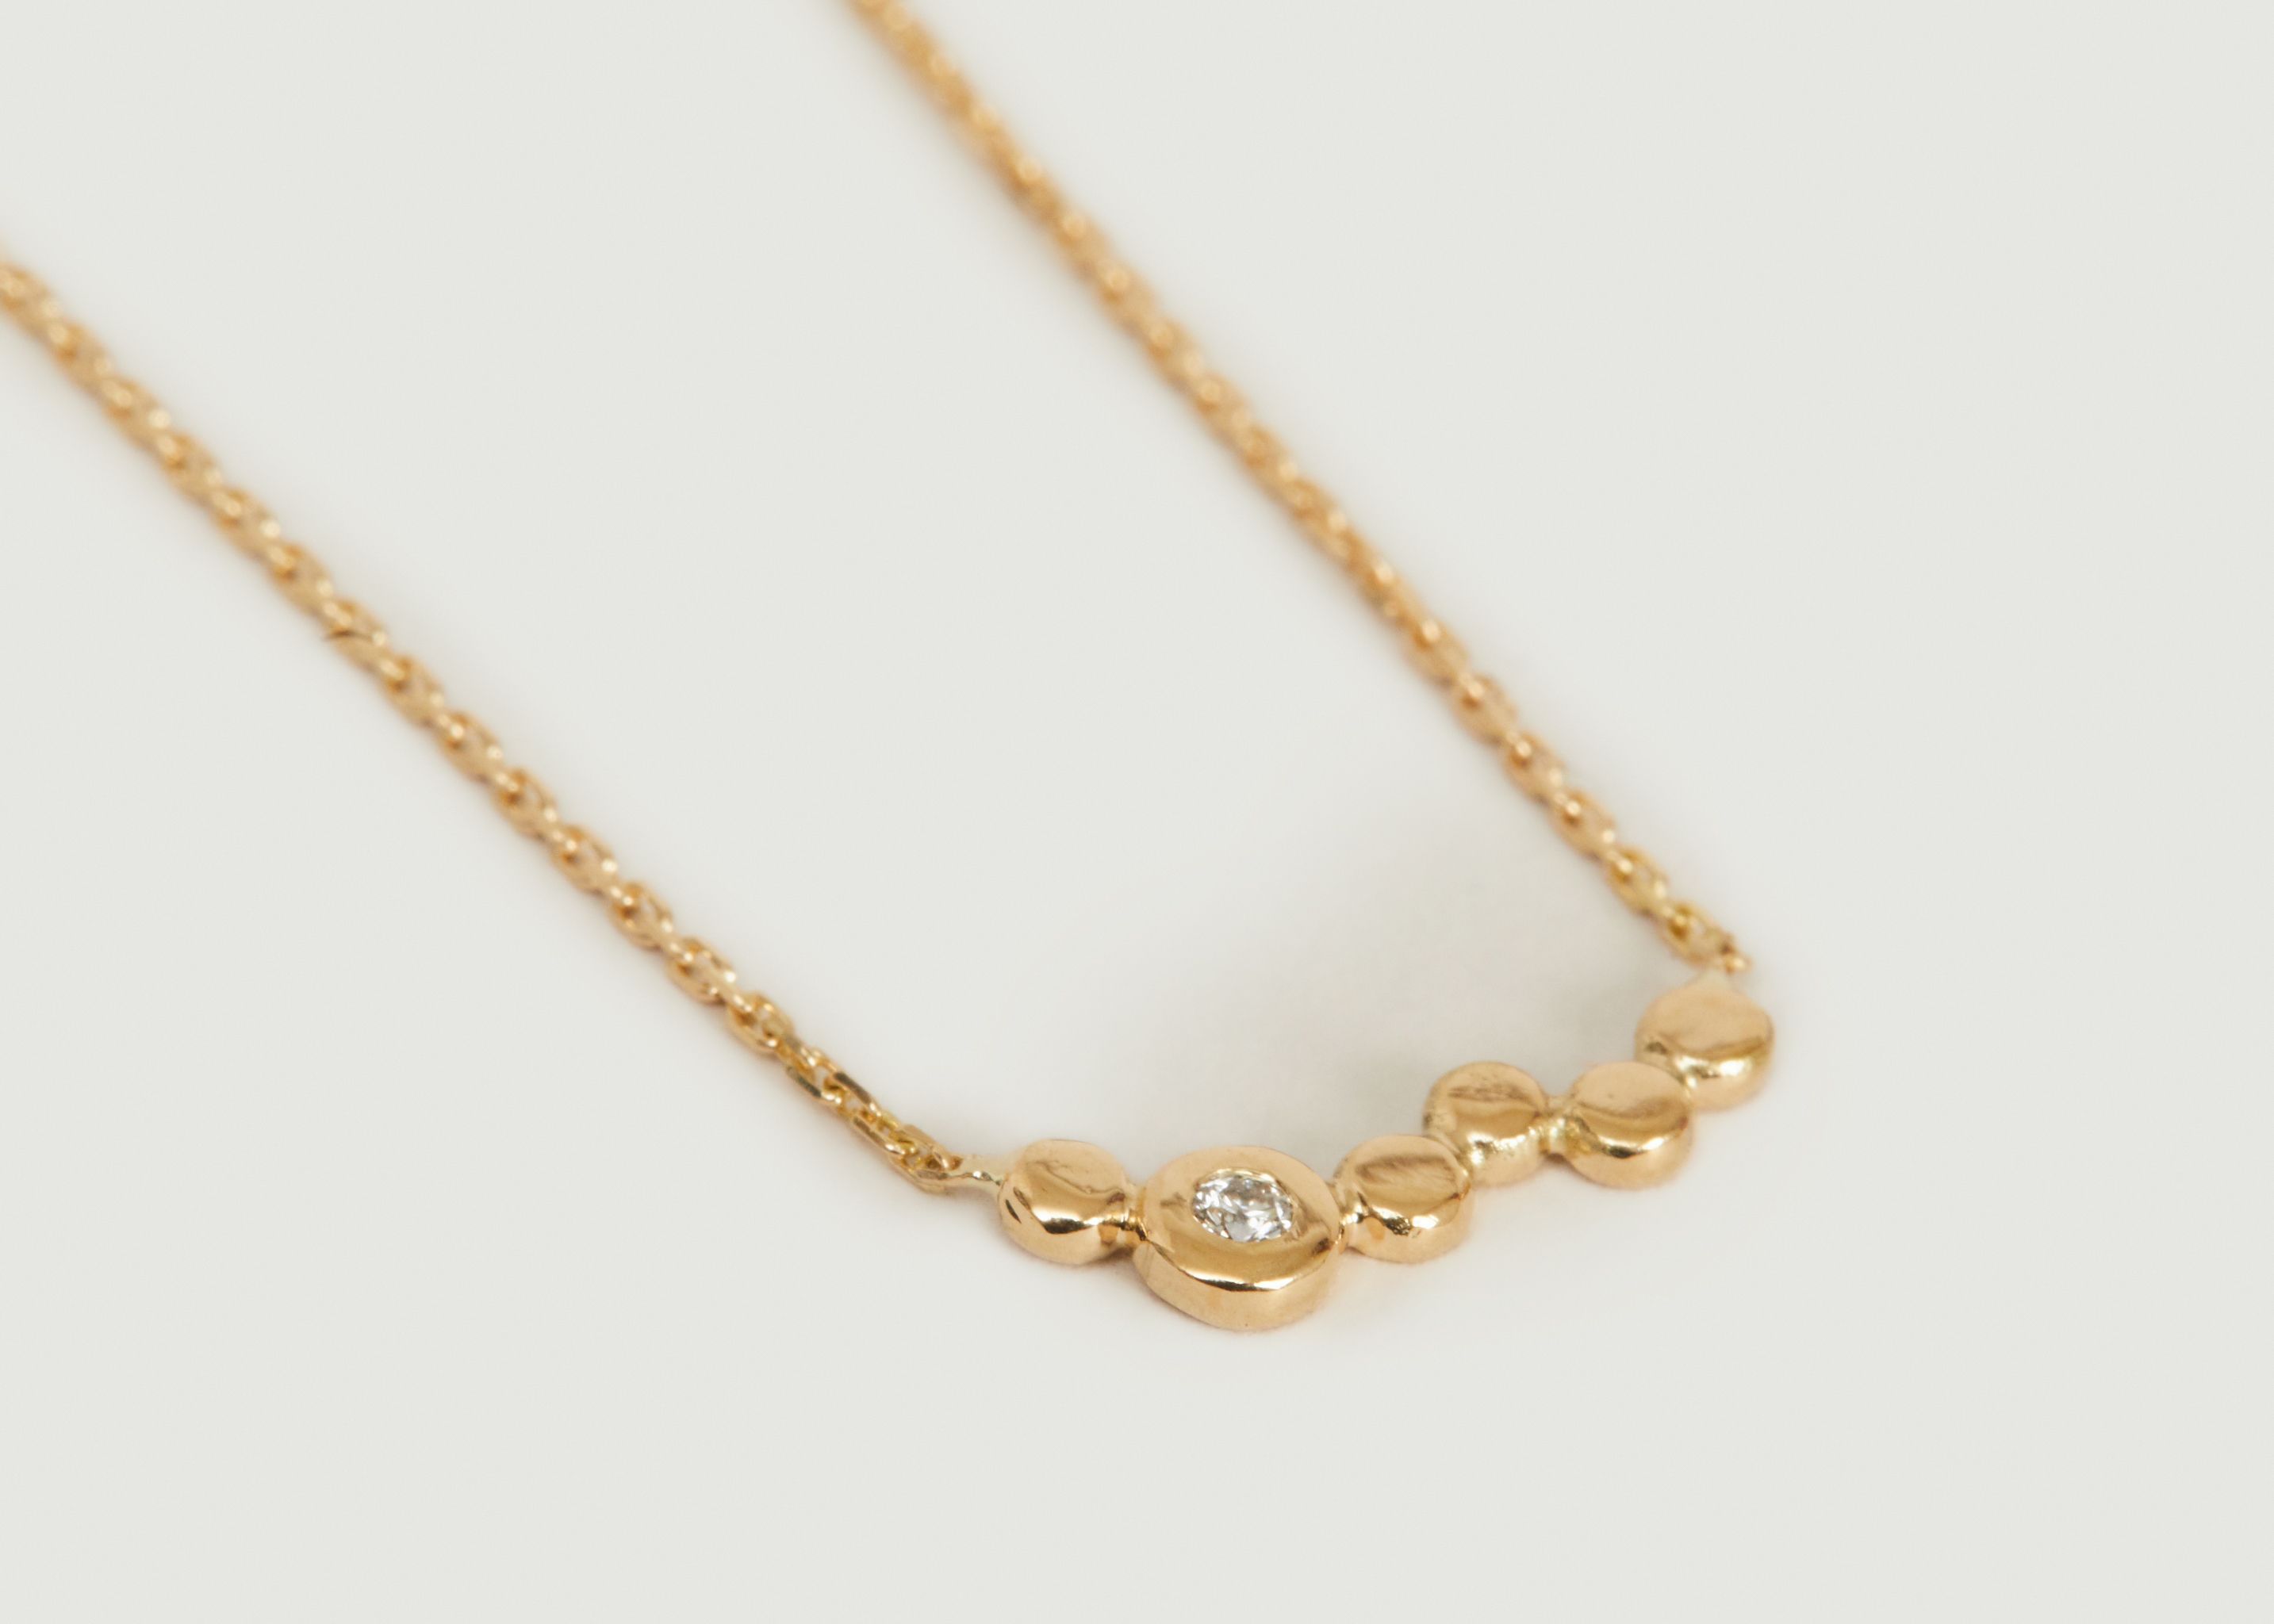 Ira gold and diamond chain necklace - Monsieur